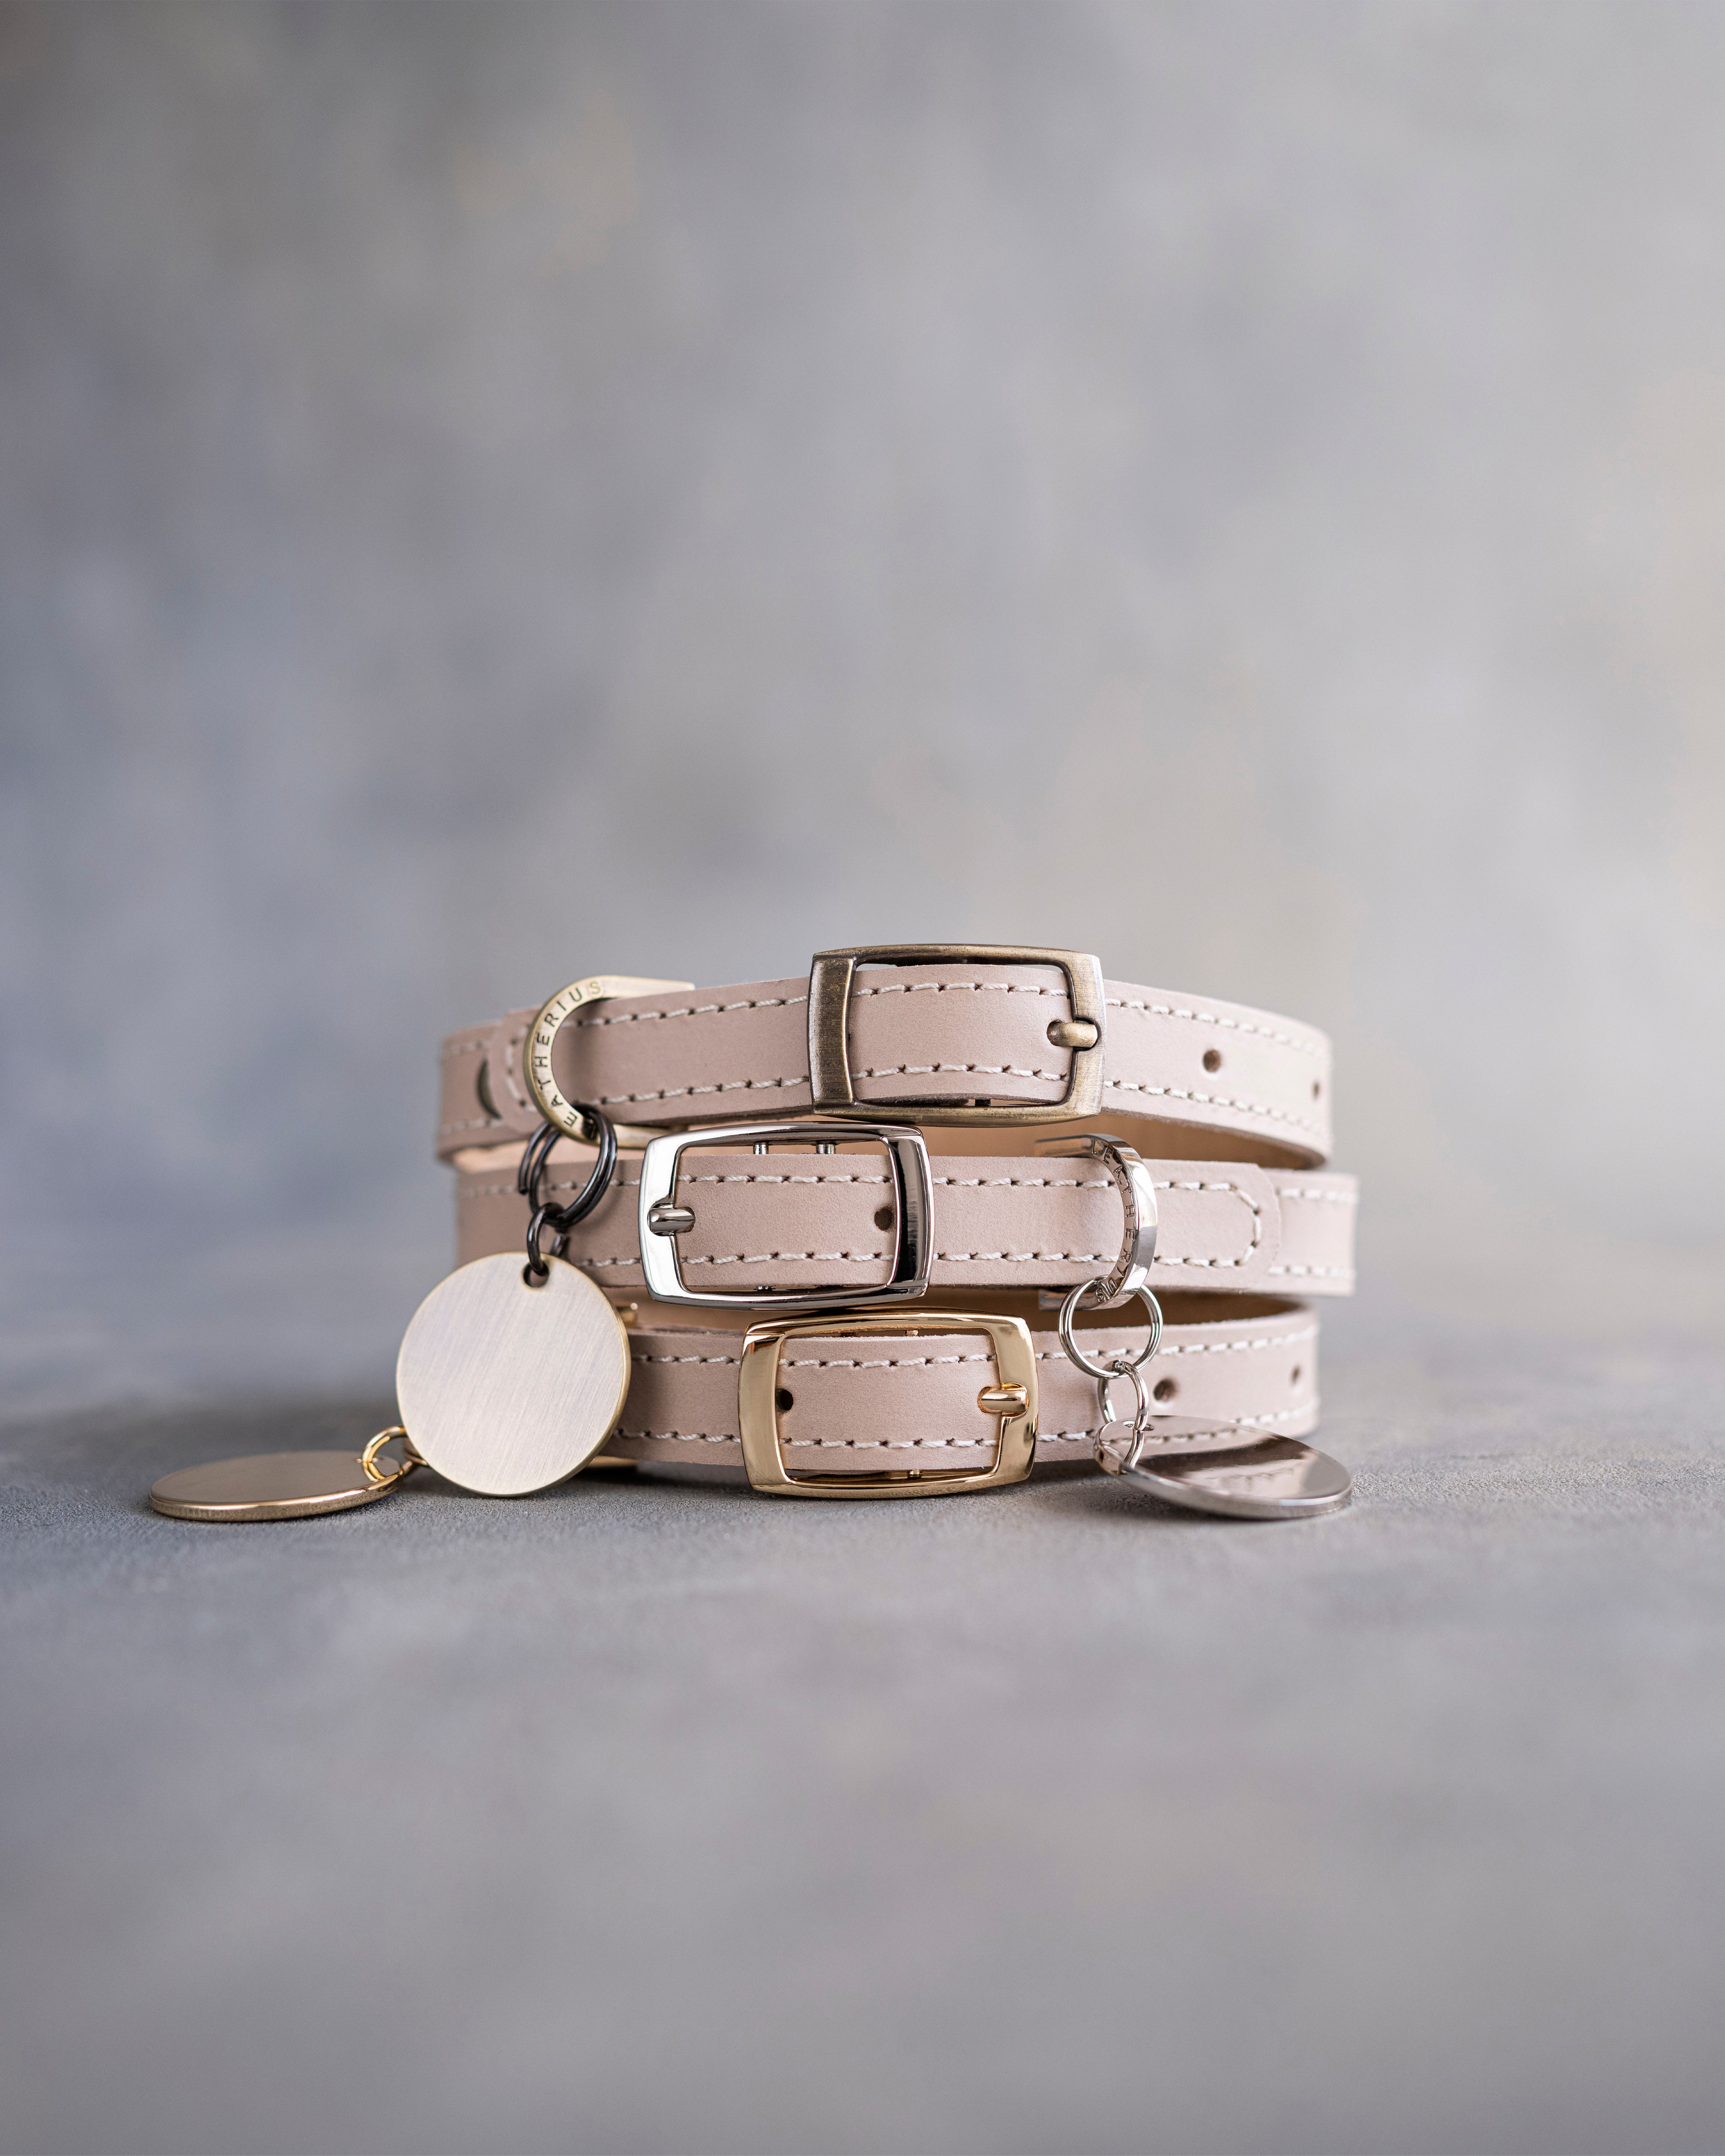 Dog Collar in Gray Sand leather with classy pin buckle